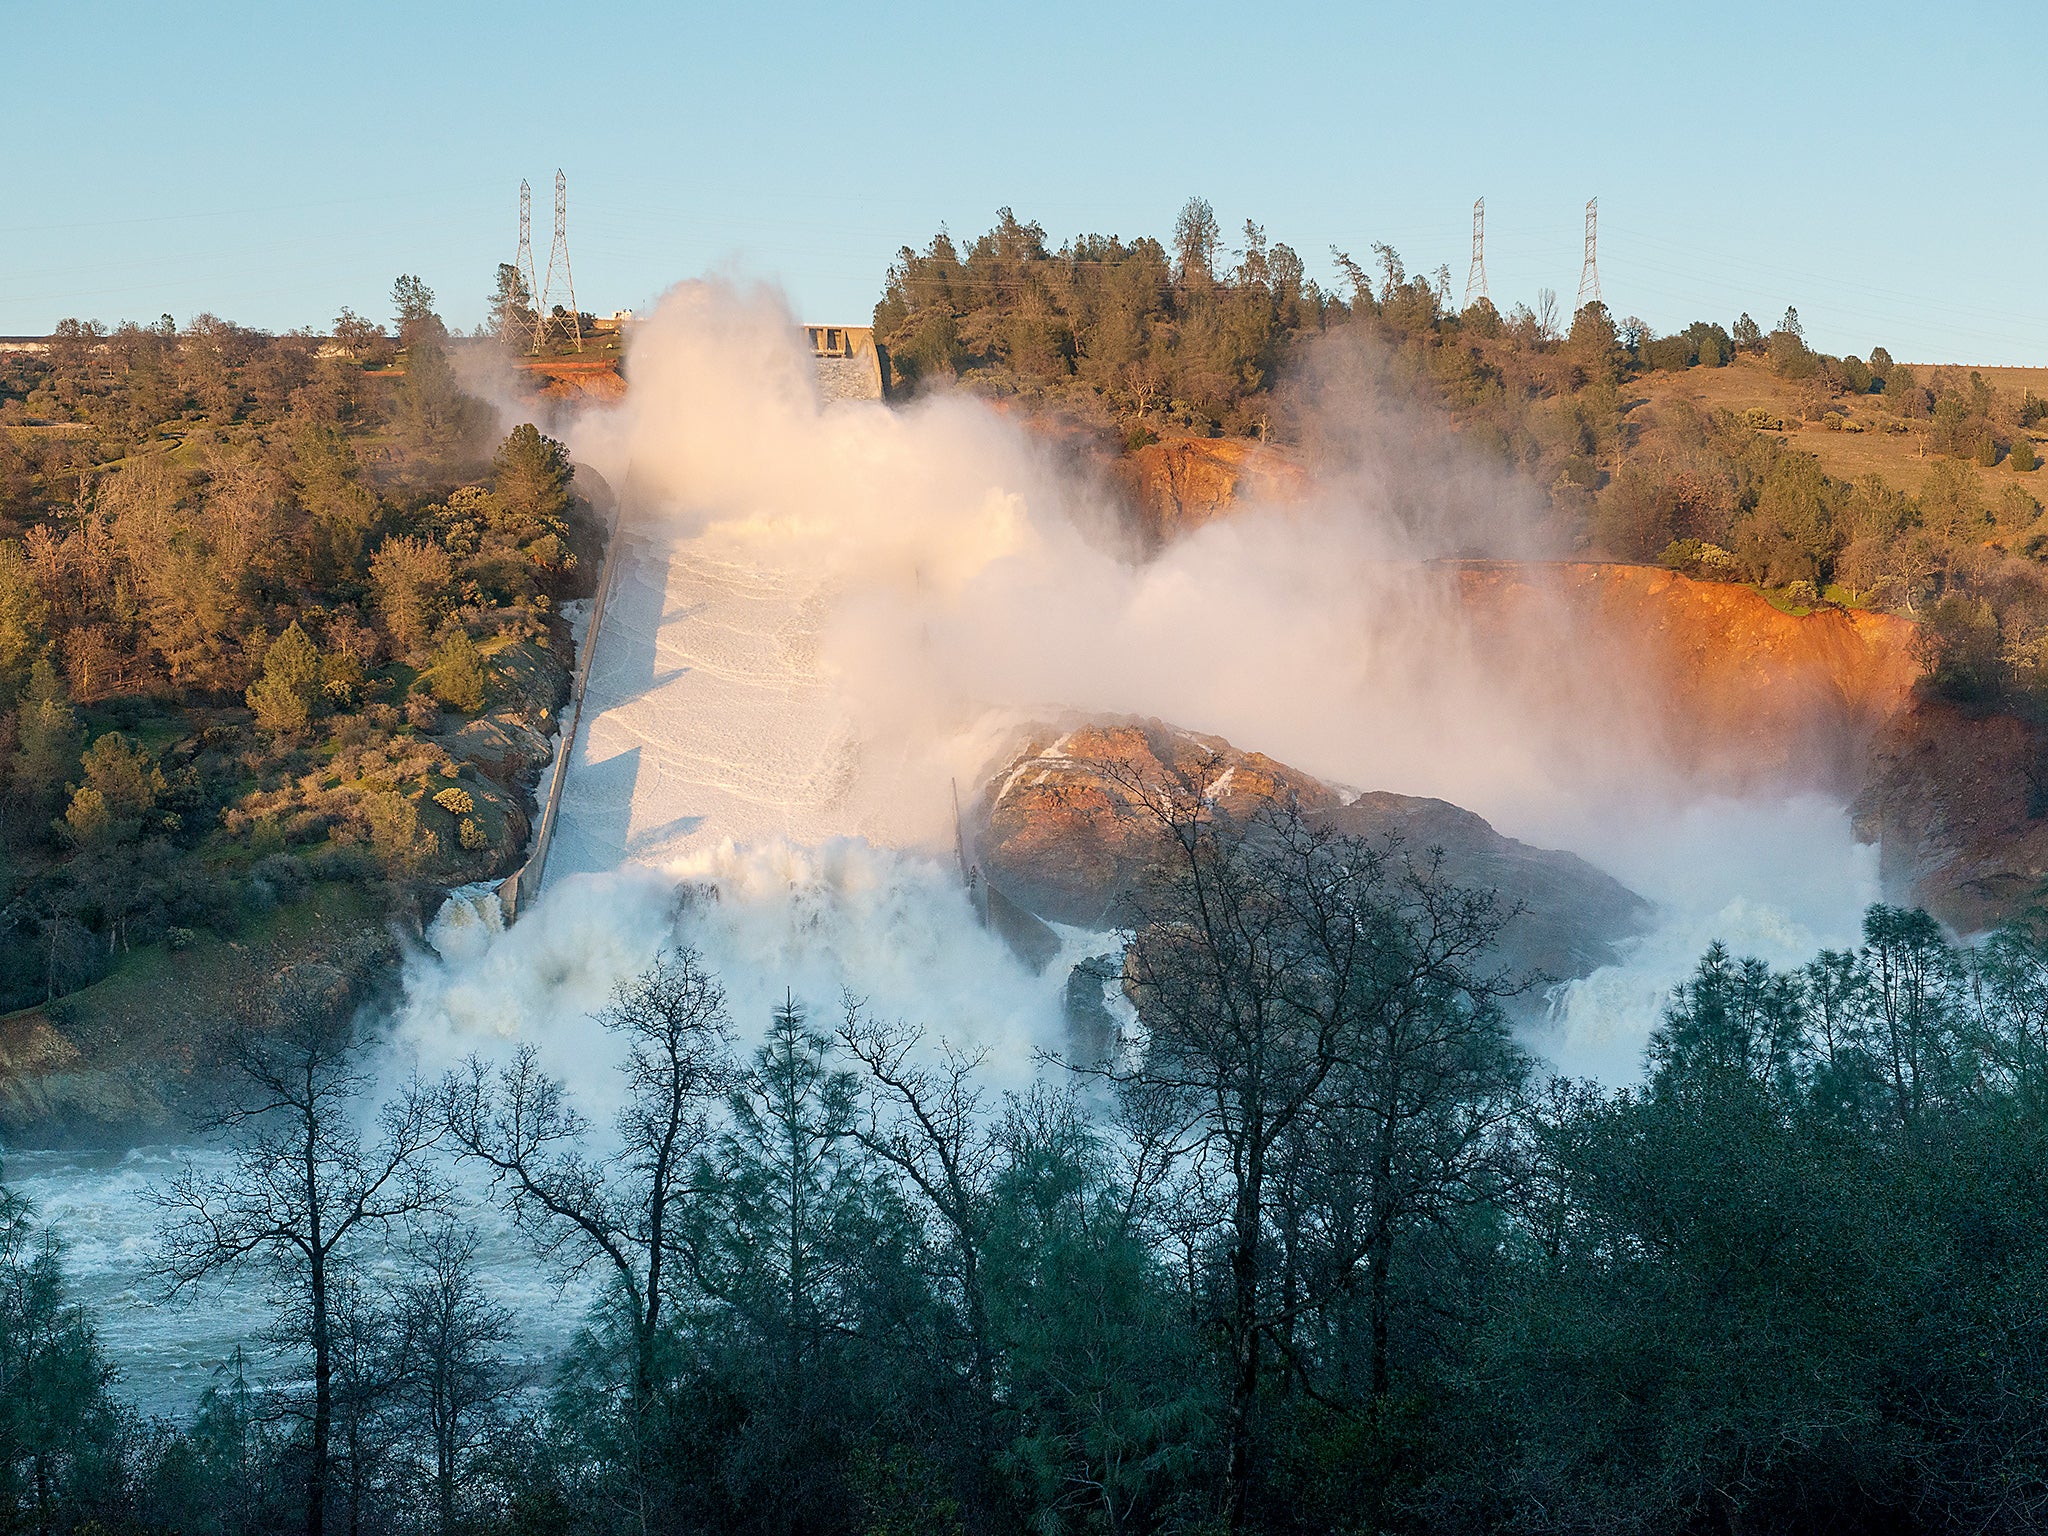 Water Resourses showing water cascading into the Feather River from the damaged Oroville Dam spillway in Butte County, USA